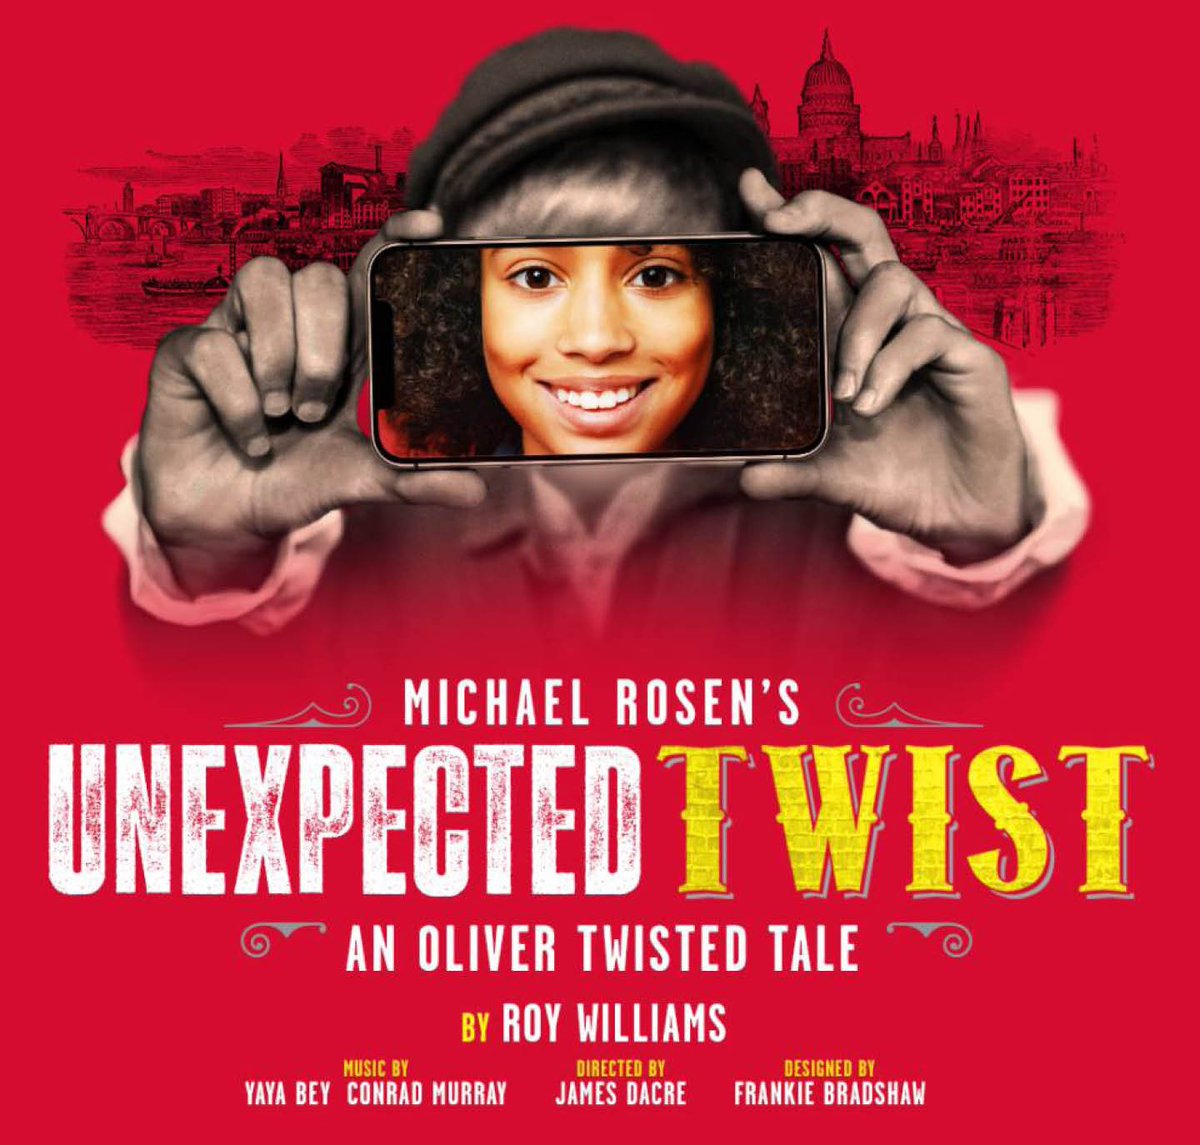 Today's show is the fresh and contemporary Unexpected Twist, written by Michael Rosen, and adapted by Roy Williams.

This is certainly one to look forward too! @RoyalNottingham 

#theatre #theatrereview #reviewpending #UnexpectedTwist